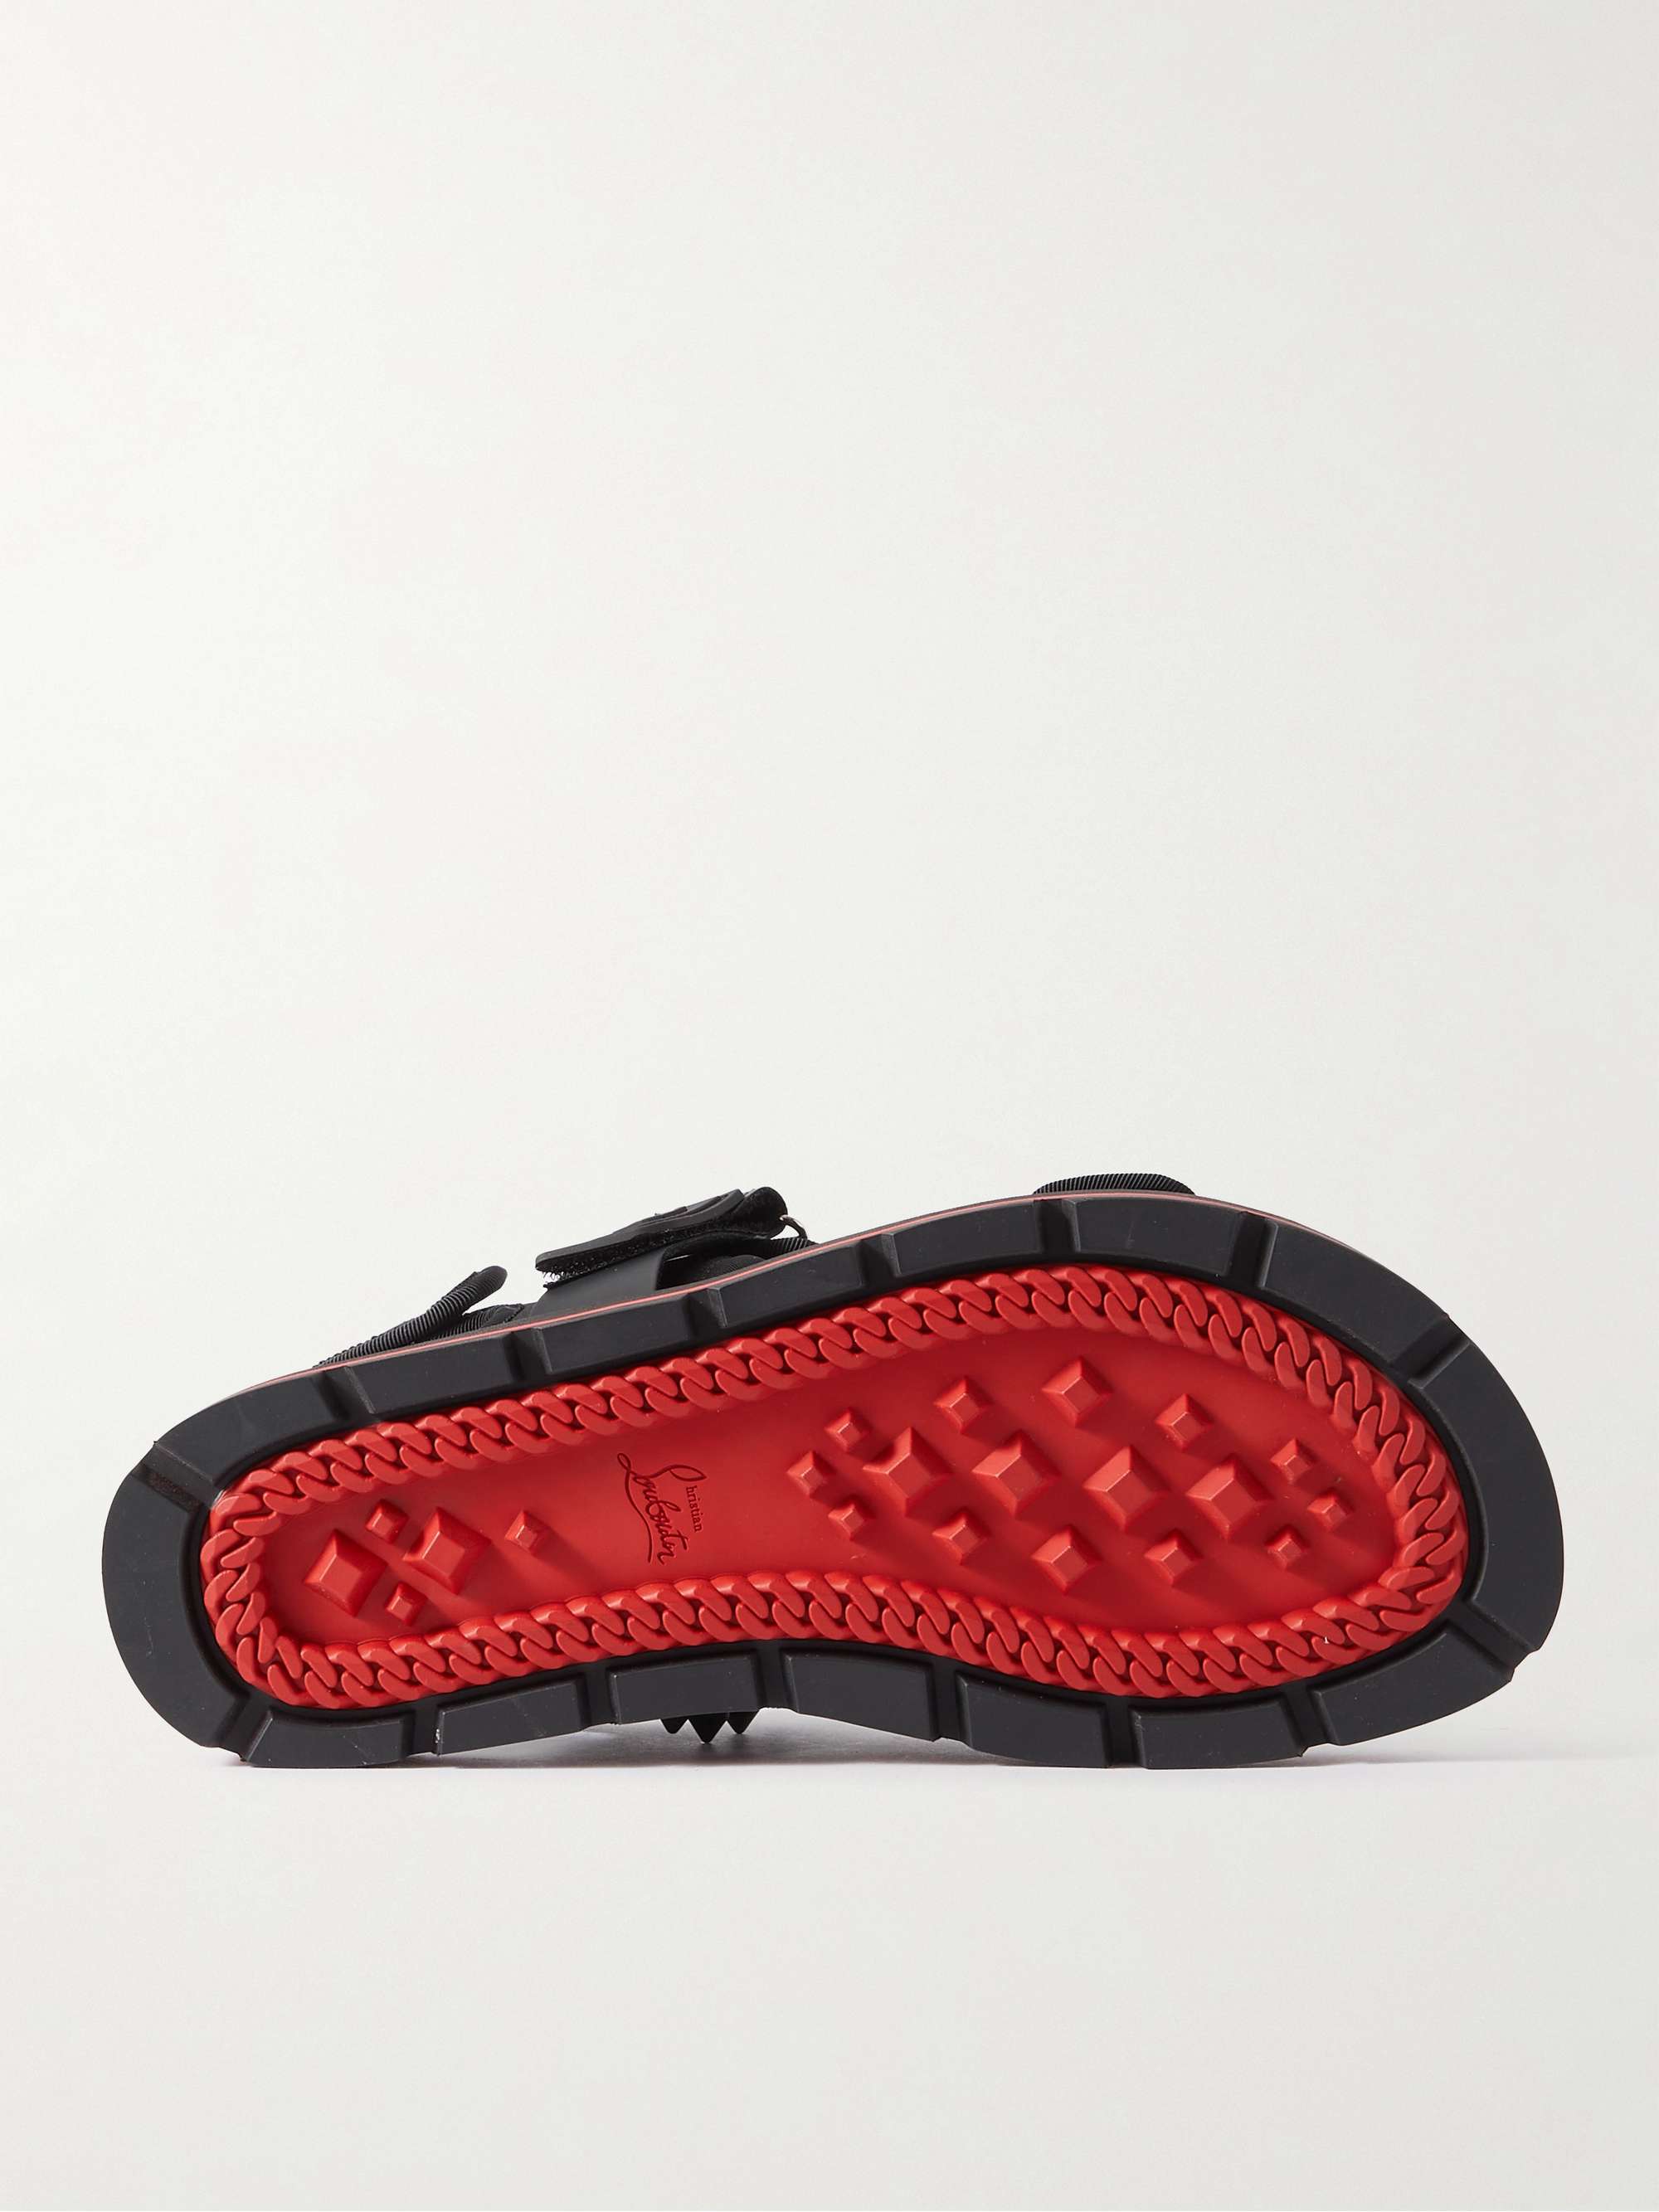 CHRISTIAN LOUBOUTIN Siwa Studded Neoprene, Rubber and Leather Sandals